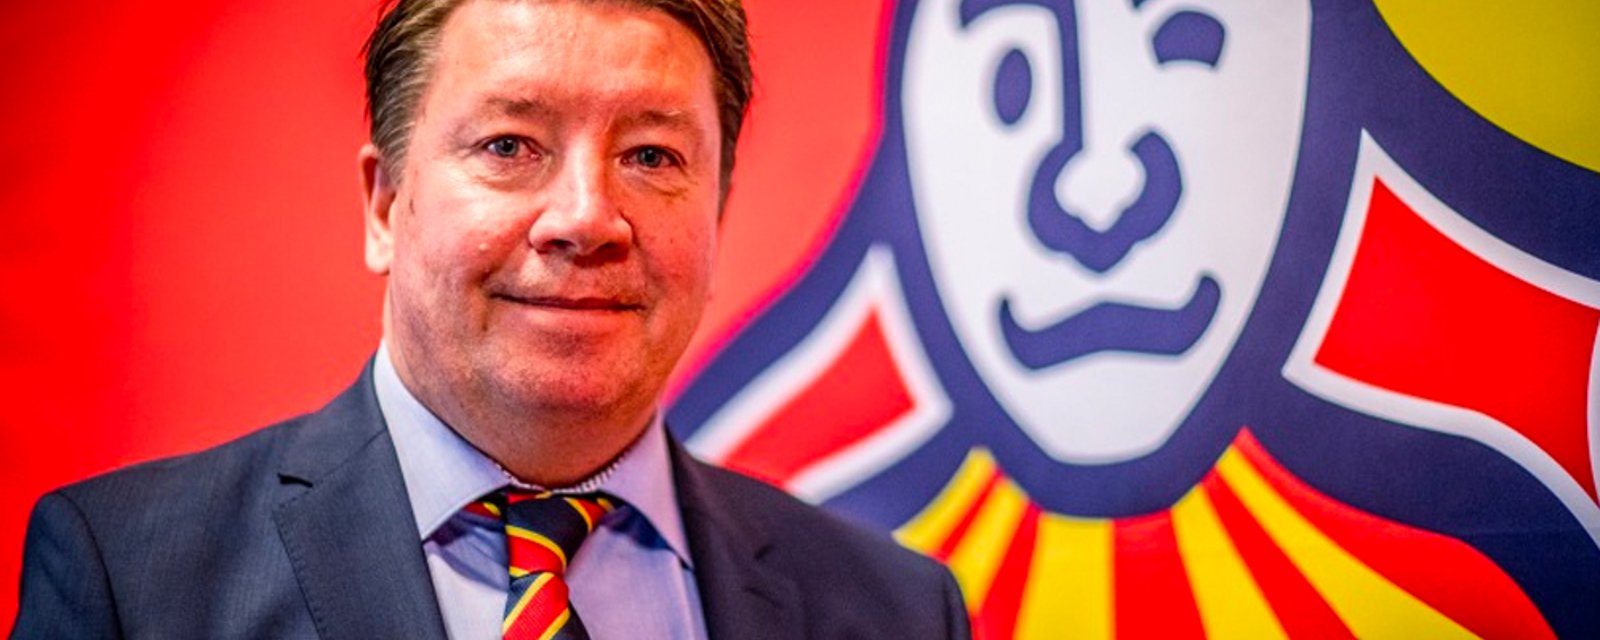 Jari Kurri and Jokerit pull out of KHL playoffs in protest of Ukrainian invasion